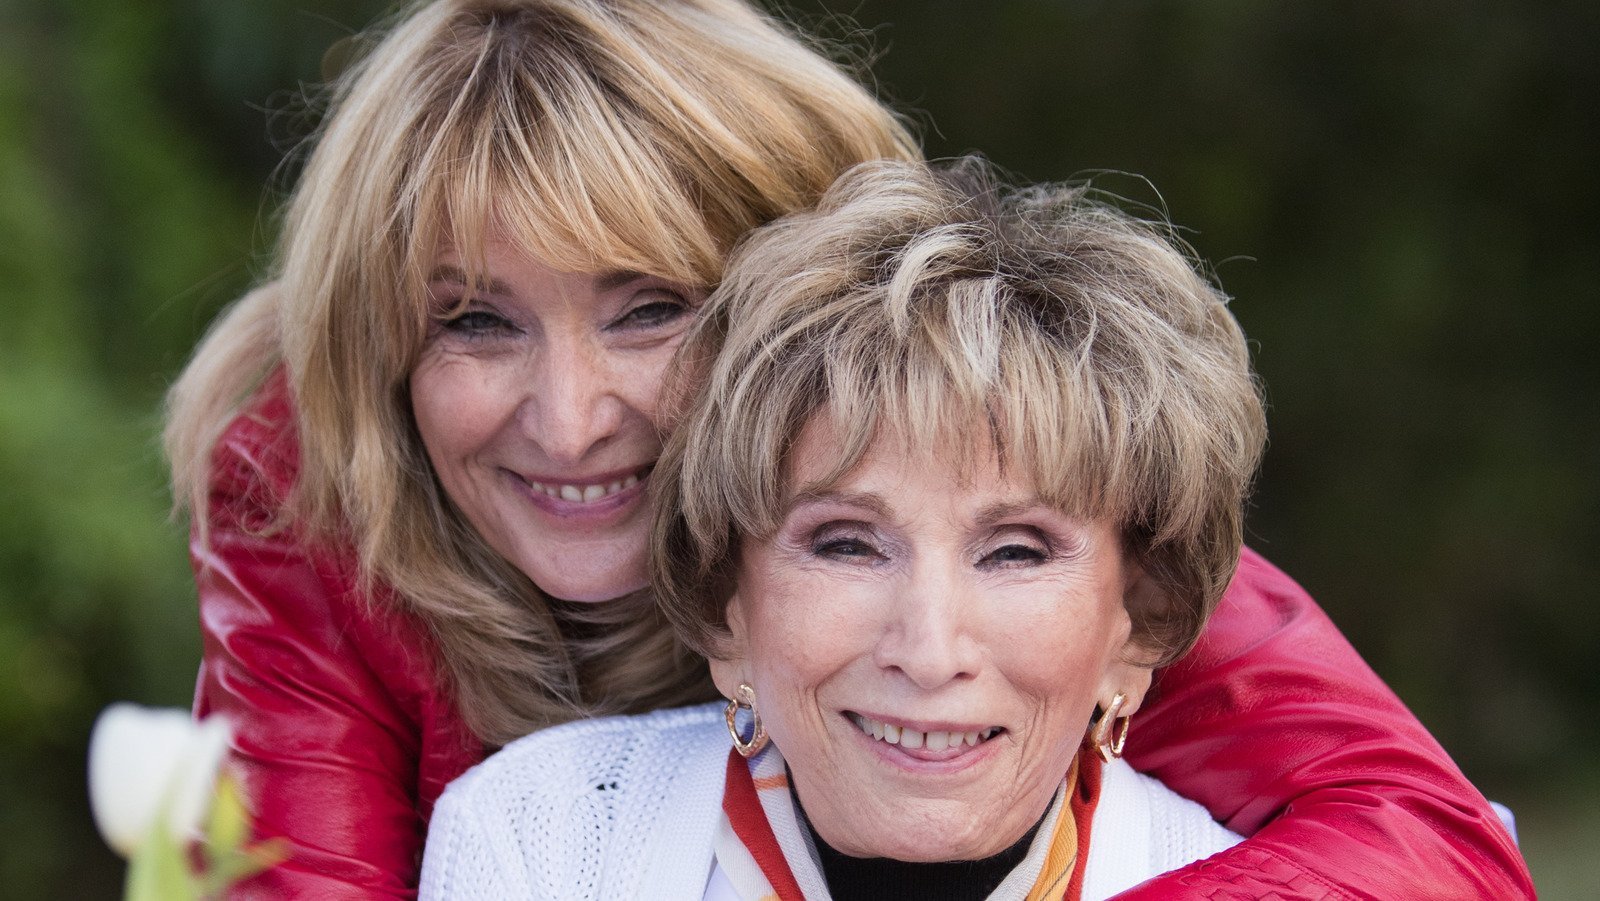 Dr. Edith Eger On Breaking Free From A Traumatic Past - Exclusive